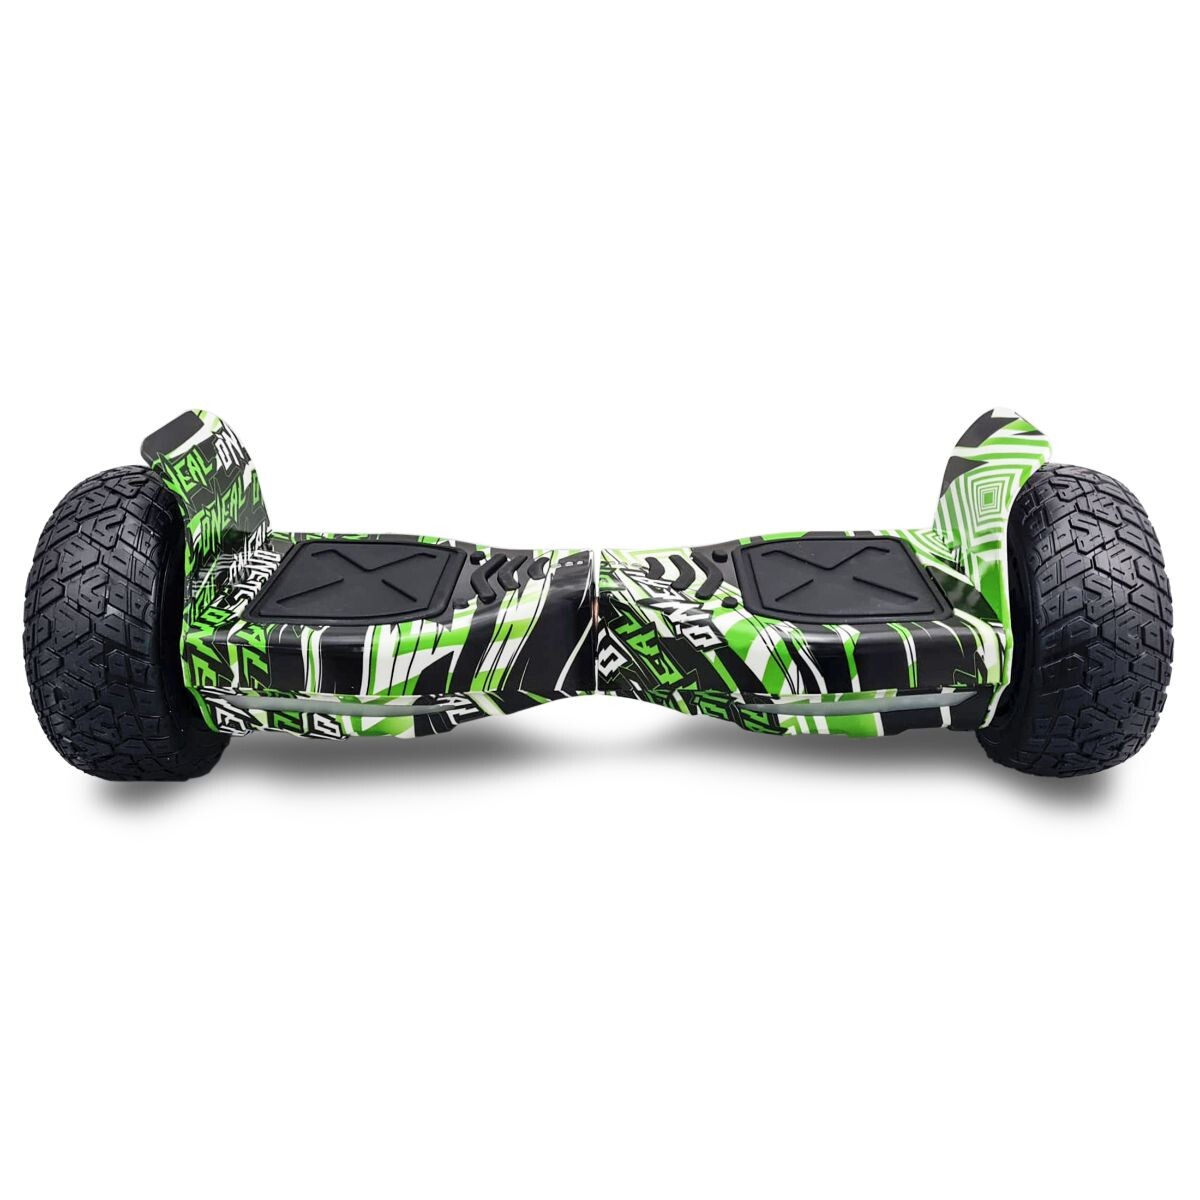 Patineta Electrica Hoverboard Todo Terreno 8.5 Luces Led - 001 